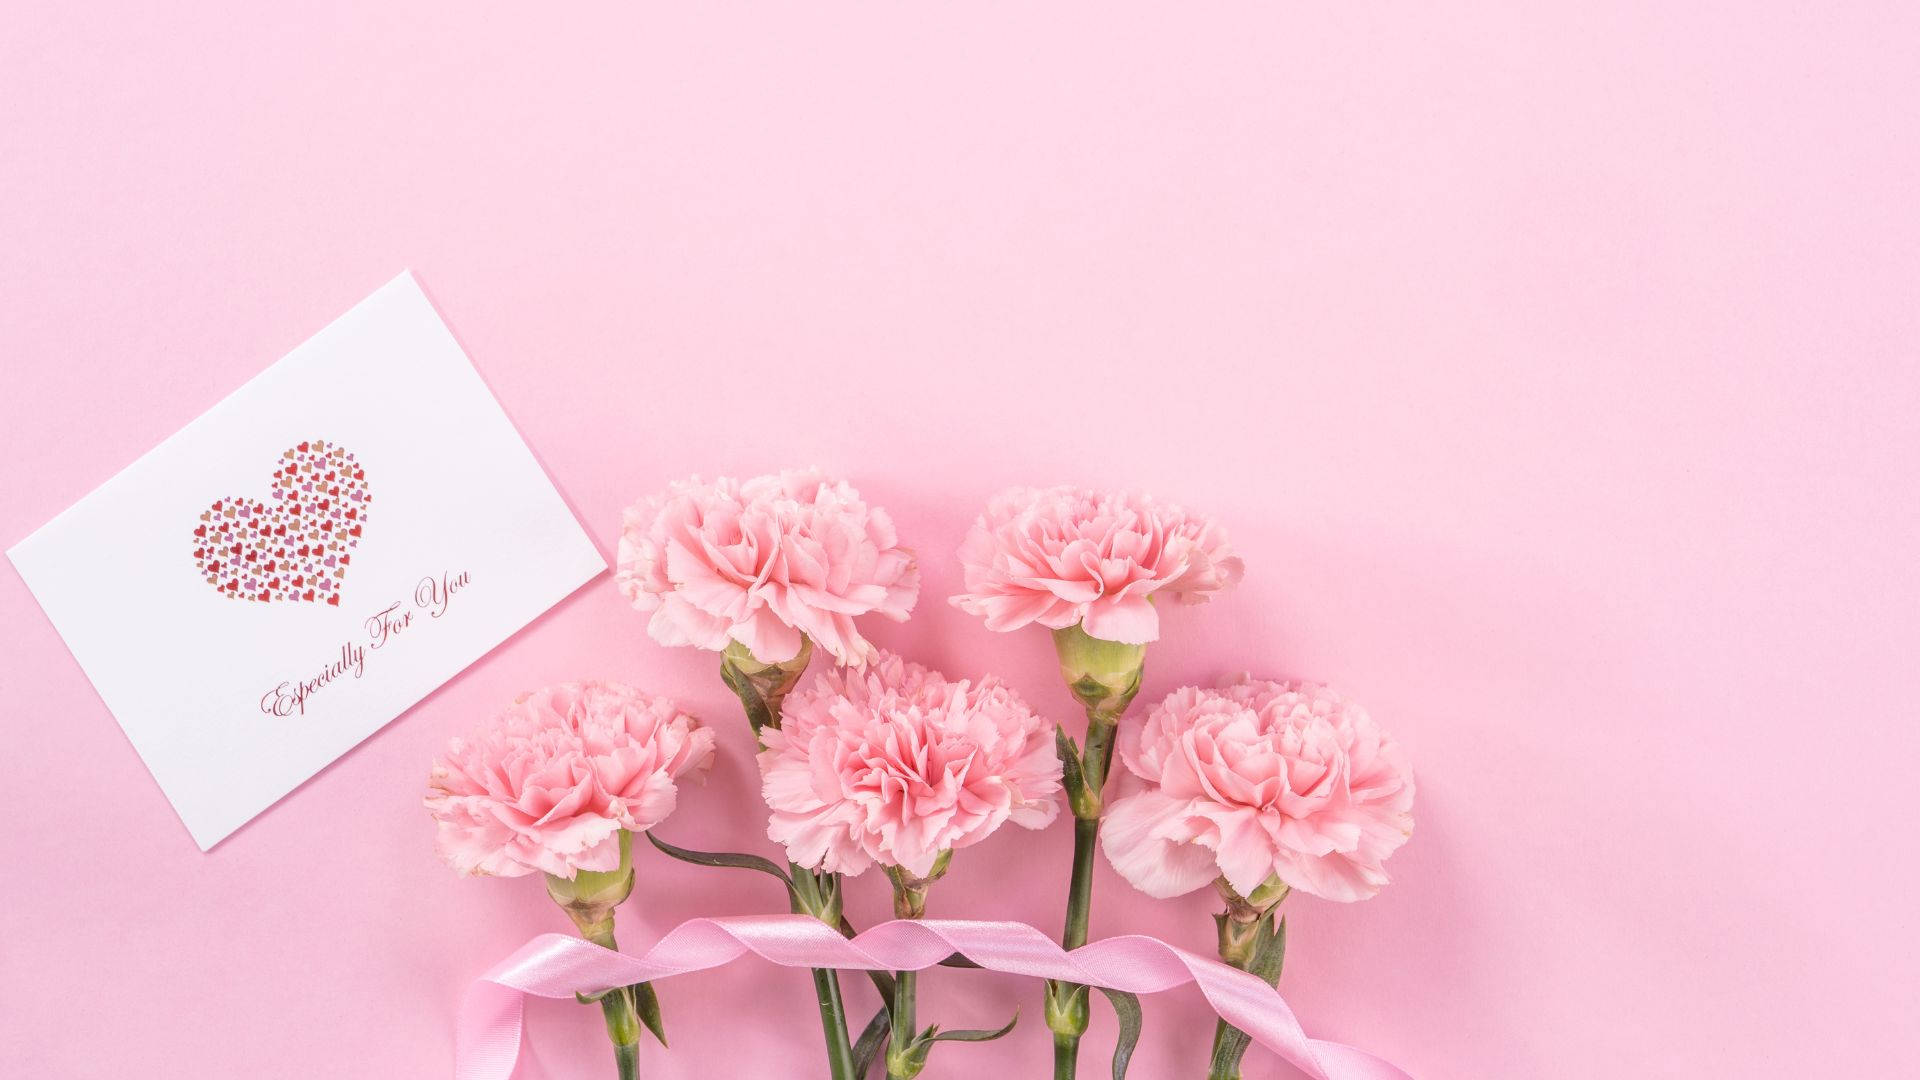 Baby Pink Carnation Flowers With Card